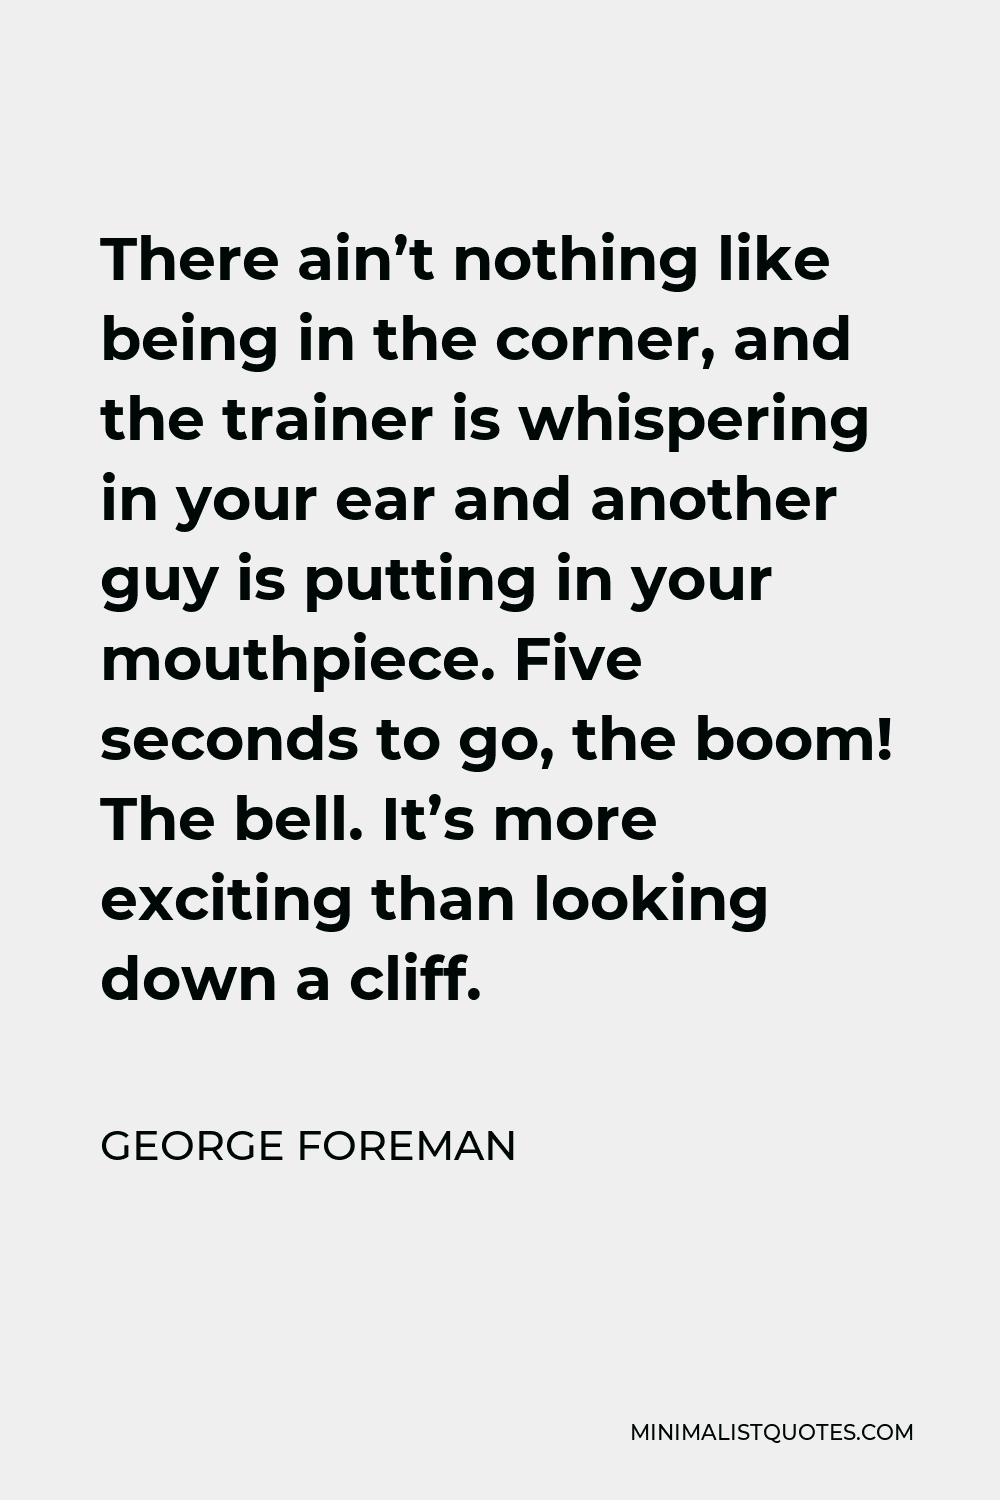 George Foreman Quote - There ain’t nothing like being in the corner, and the trainer is whispering in your ear and another guy is putting in your mouthpiece. Five seconds to go, the boom! The bell. It’s more exciting than looking down a cliff.